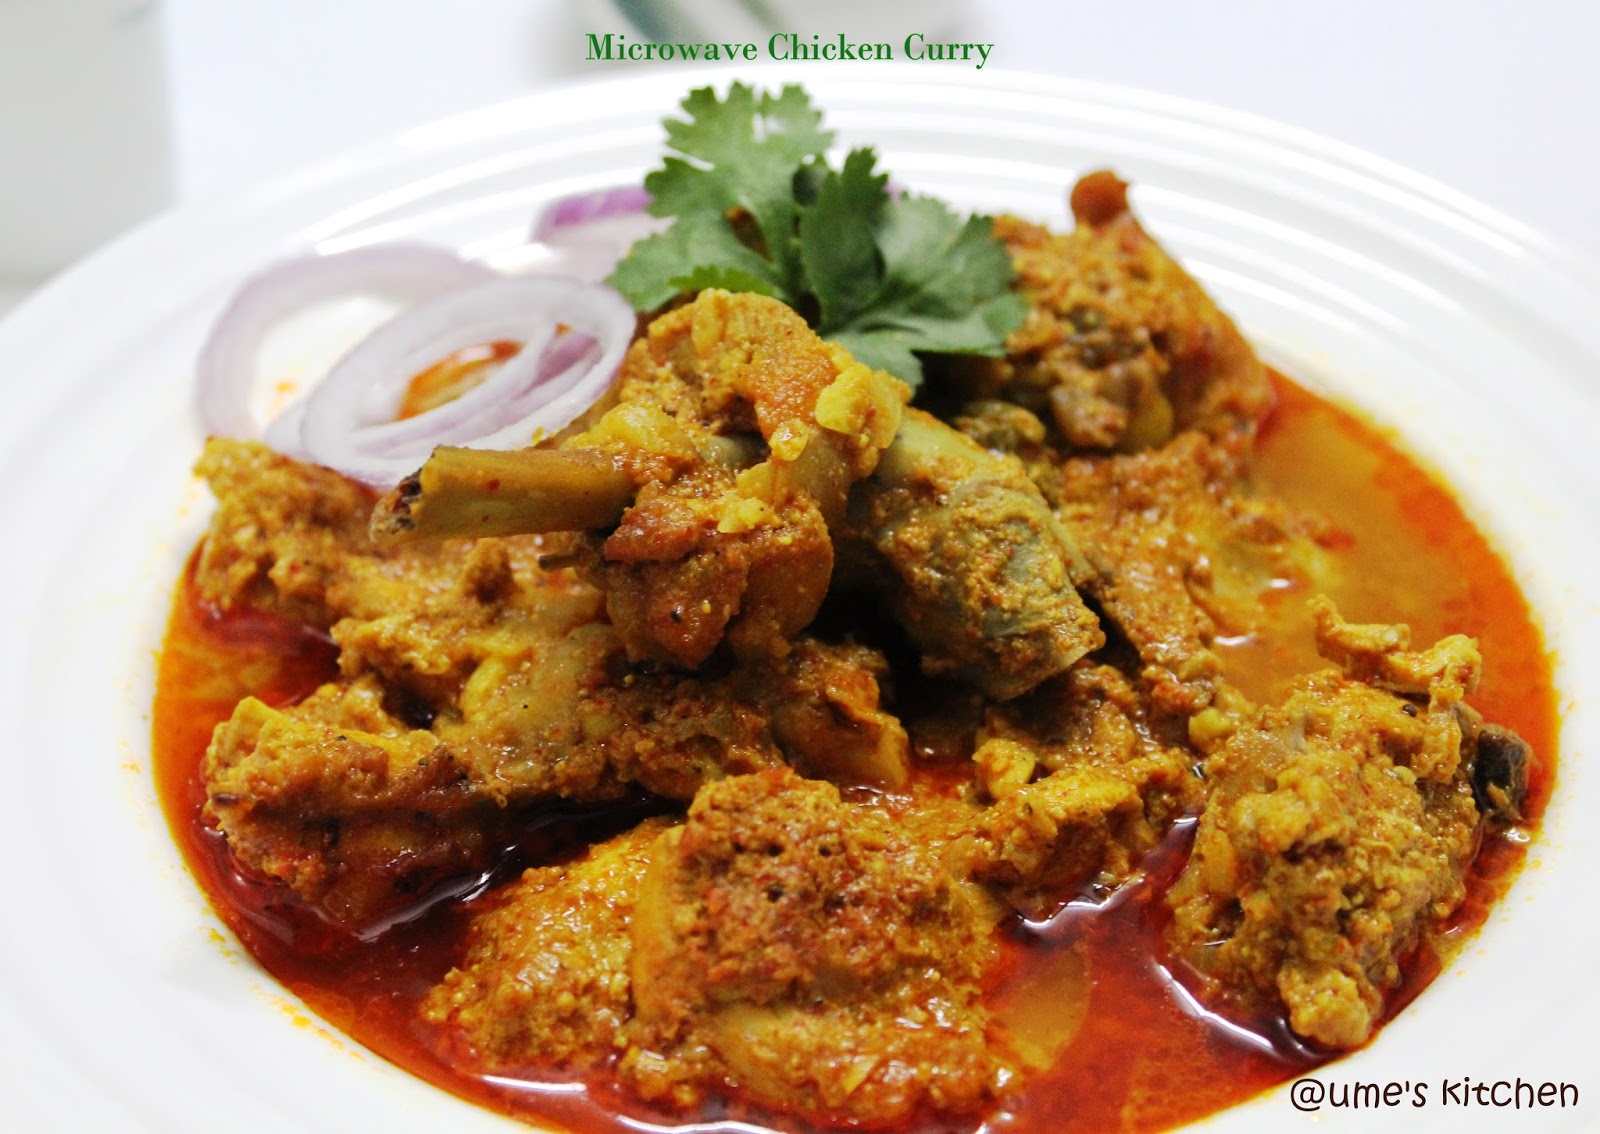 Ume's Kitchen: Quick and Simple Microwave Chicken Curry